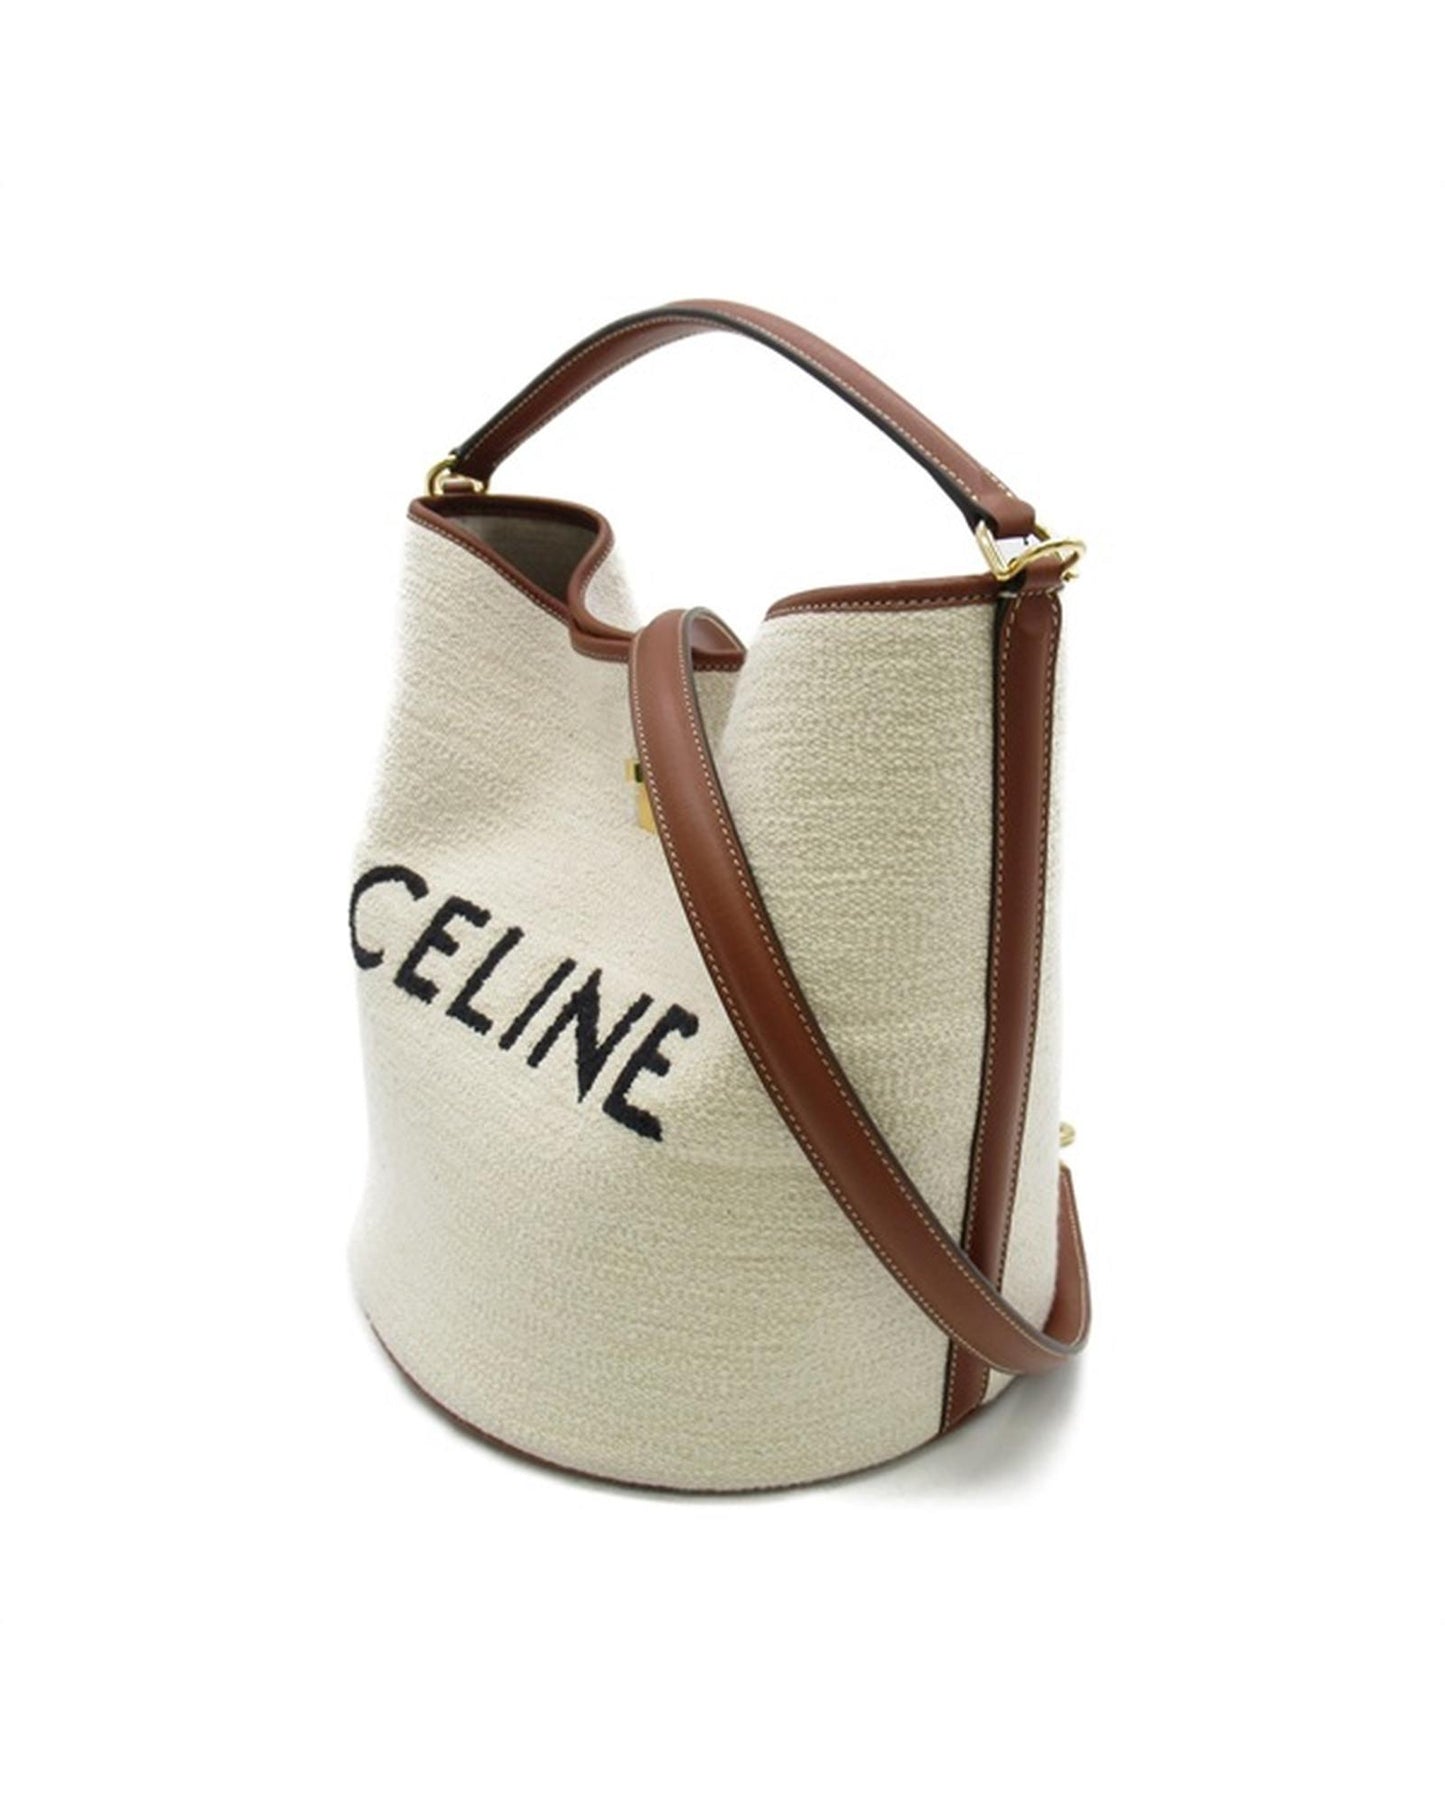 Celine Women's White Canvas Bucket Bag in Excellent Condition in White